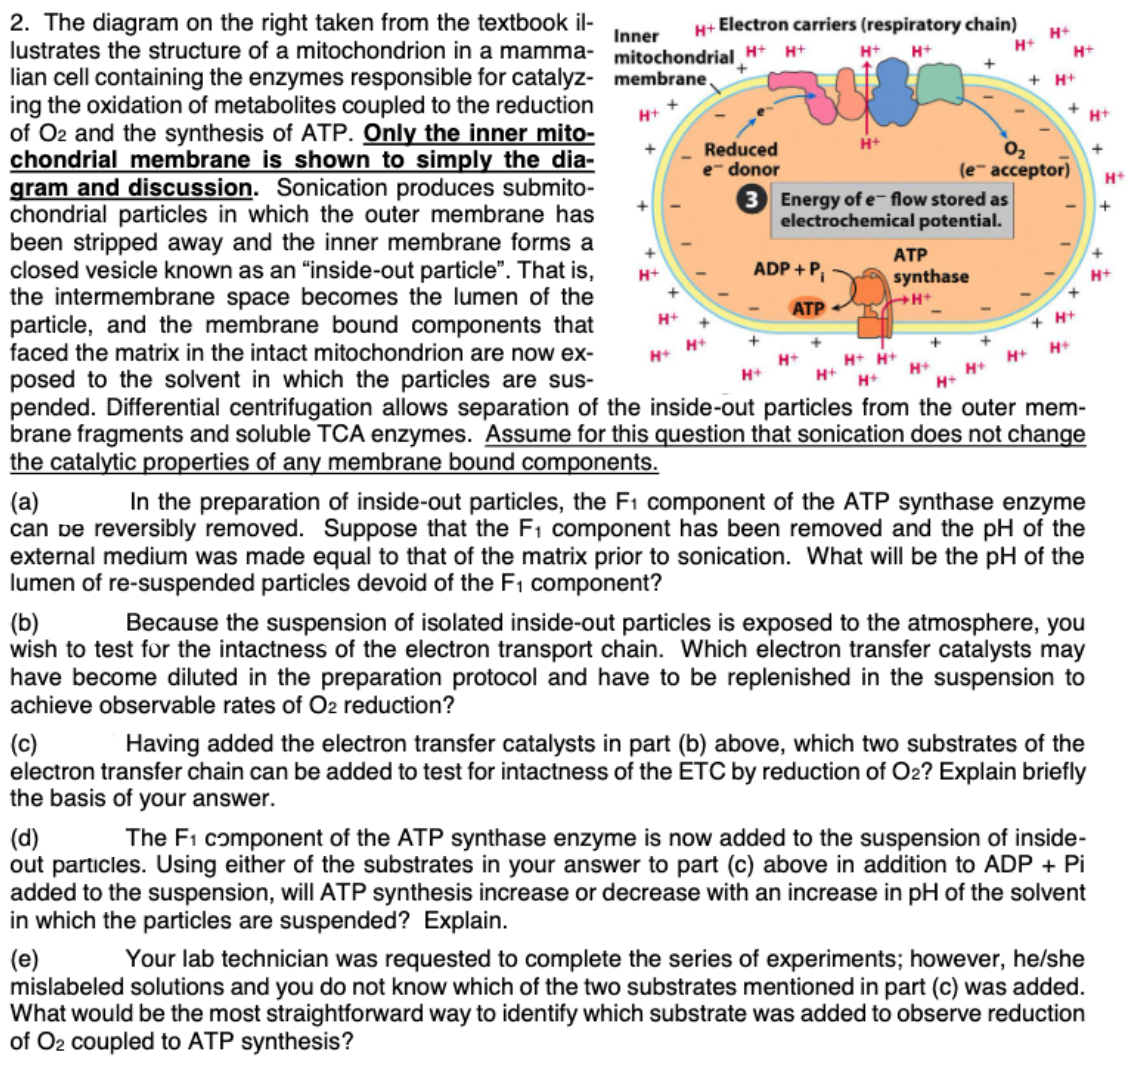 2. The diagram on the right taken from the textbook il-
lustrates the structure of a mitochondrion in a mamma- mitochondrial H* H+
lian cell containing the enzymes responsible for catalyz- membrane.
ing the oxidation of metabolites coupled to the reduction
of O2 and the synthesis of ATP. Only the inner mito-
chondrial membrane is shown to simply the dia-
gram and discussion. Sonication produces submito-
chondrial particles in which the outer membrane has
been stripped away and the inner membrane forms a
closed vesicle known as an "inside-out particle". That is,
the intermembrane space becomes the lumen of the
particle, and the membrane bound components that
faced the matrix in the intact mitochondrion are now ex-
Electron carriers (respiratory chain)
Inner
H+
H+
H+
H+
H+
+ H+
H+
02
(e- acceptor)
3 Energy of e- flow stored as
electrochemical potential.
Reduced
e- donor
H+
ATP
ADP + P,
H+
synthase
H+
H+
АТР
H+
+ H+
H+
H+
H+
H+
H+ H+
H+
H+
posed to the solvent in which the particles are sus-
pended. Differential centrifugation allows separation of the inside-out particles from the outer mem-
brane fragments and soluble TCA enzymes. Assume for this question that sonication does not change
the catalytic
H+
H+
H+
H+
erties of any membrane bound components.
In the preparation of inside-out particles, the F1 component of the ATP synthase enzyme
(a)
can pe reversibly removed. Suppose that the F1 component has been removed and the pH of the
external medium was made equal to that of the matrix prior to sonication. What will be the pH of the
lumen of re-suspended particles devoid of the F1 component?
Because the suspension of isolated inside-out particles is exposed to the atmosphere, you
(b)
wish to test for the intactness of the electron transport chain. Which electron transfer catalysts may
have become diluted in the preparation protocol and have to be replenished in the suspension to
achieve observable rates of O2 reduction?
(c)
electron transfer chain can be added to test for intactness of the ETC by reduction of O2? Explain briefly
the basis of your answer.
Having added the electron transfer catalysts in part (b) above, which two substrates of the
(d)
out particles. Using either of the substrates in your answer to part (c) above in addition to ADP + Pi
added to the suspension, will ATP synthesis increase or decrease with an increase in pH of the solvent
in which the particles are suspended? Explain.
The F1 component of the ATP synthase enzyme is now added to the suspension of inside-
(e)
mislabeled solutions and you do not know which of the two substrates mentioned in part (c) was added.
What would be the most straightforward way to identify which substrate was added to observe reduction
of O2 coupled to ATP synthesis?
Your lab technician was requested to complete the series of experiments; however, he/she
